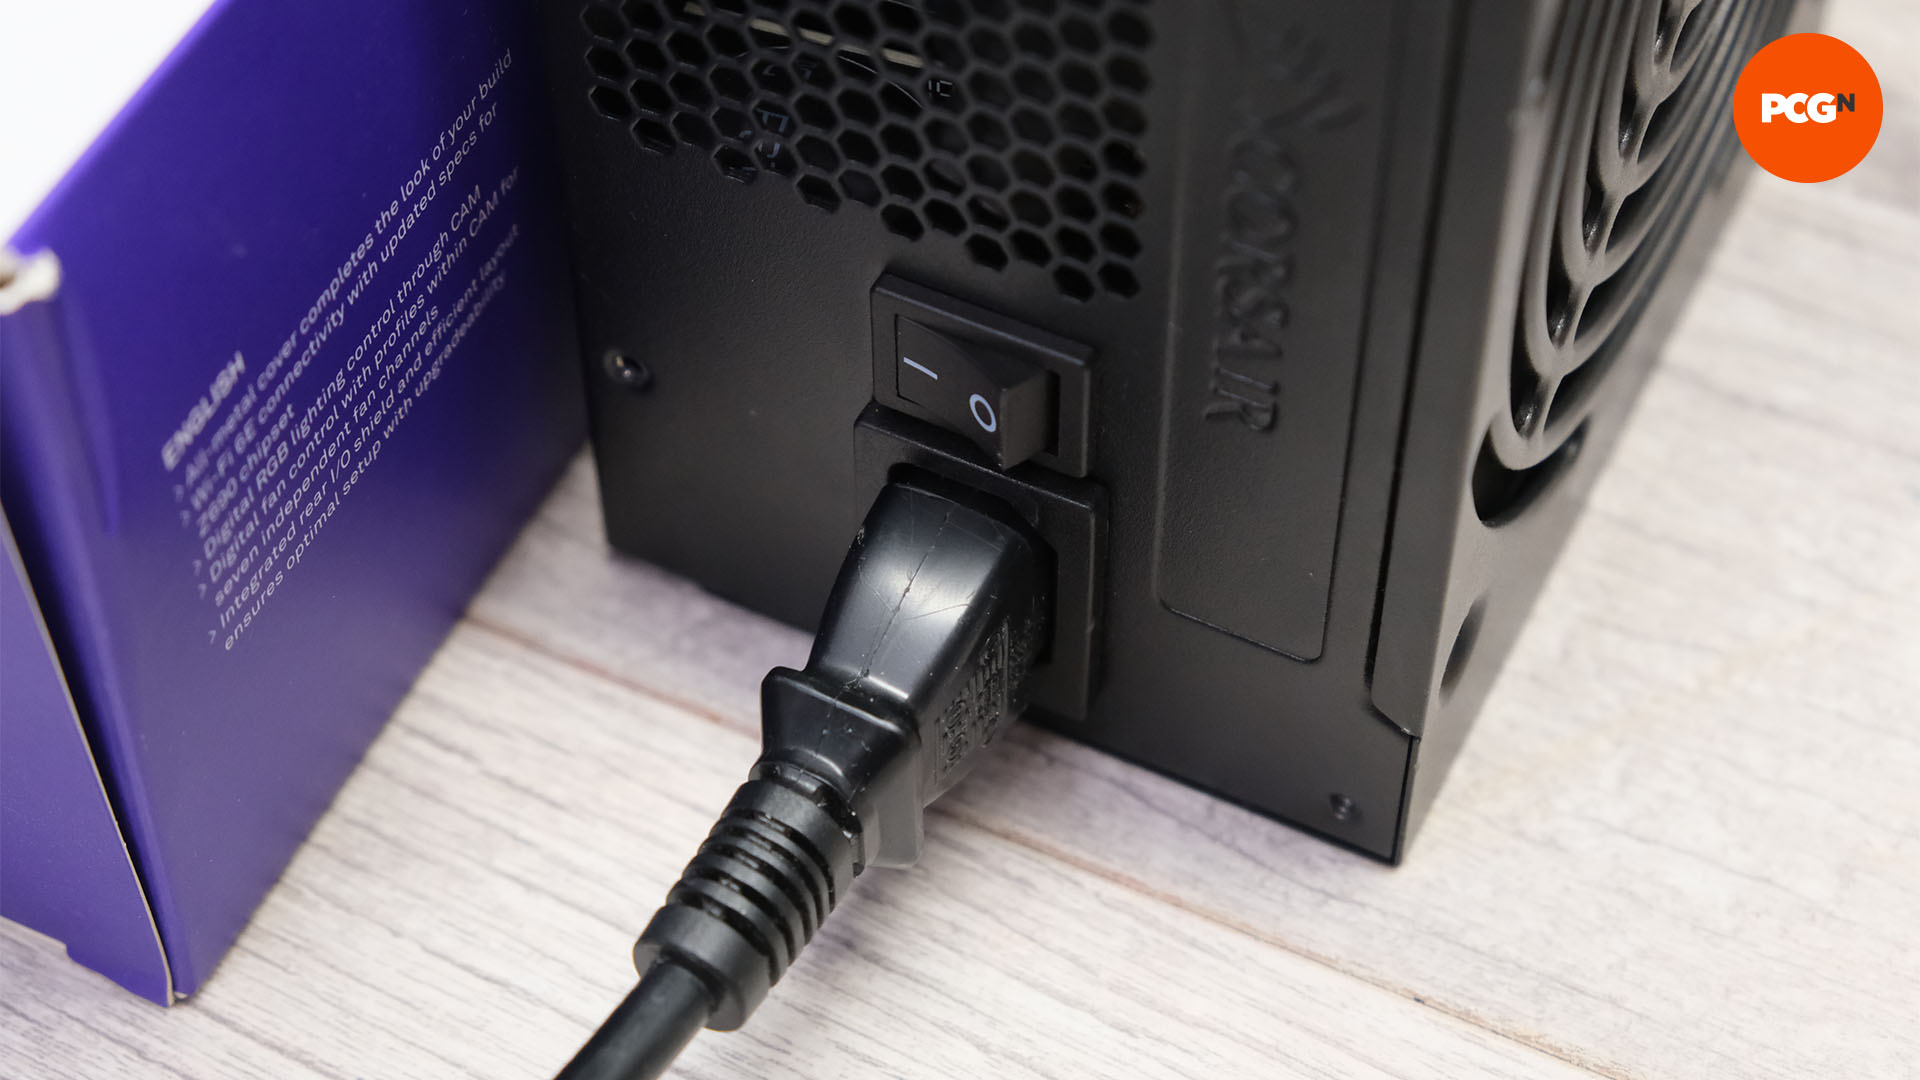 How to build a gaming PC: Connect PSU to mains